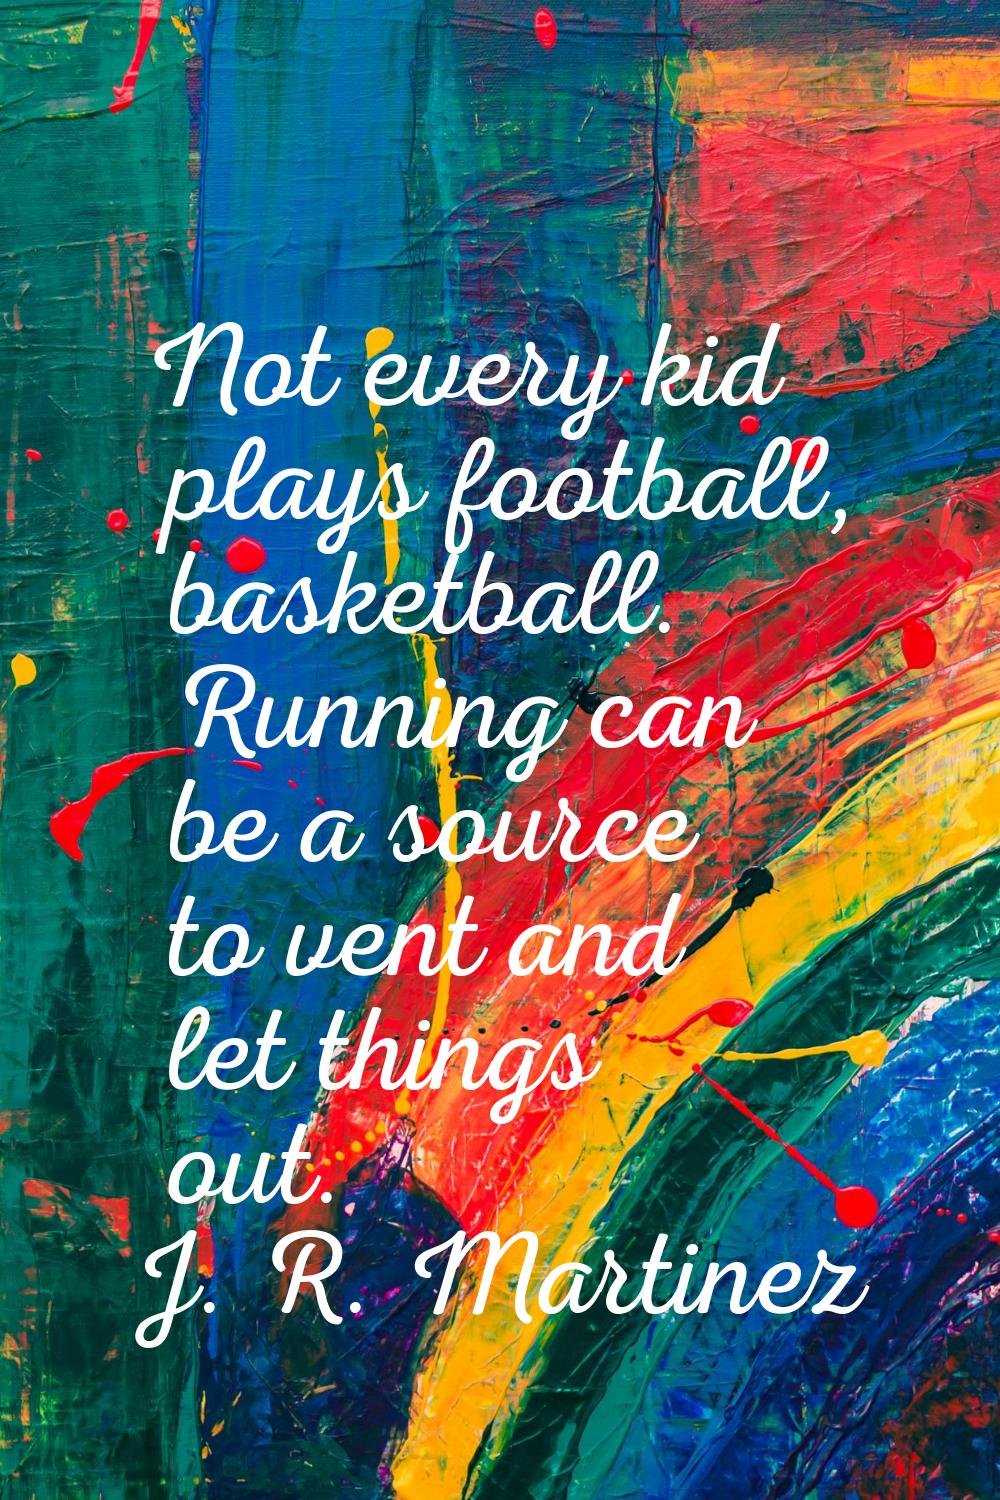 Not every kid plays football, basketball. Running can be a source to vent and let things out.